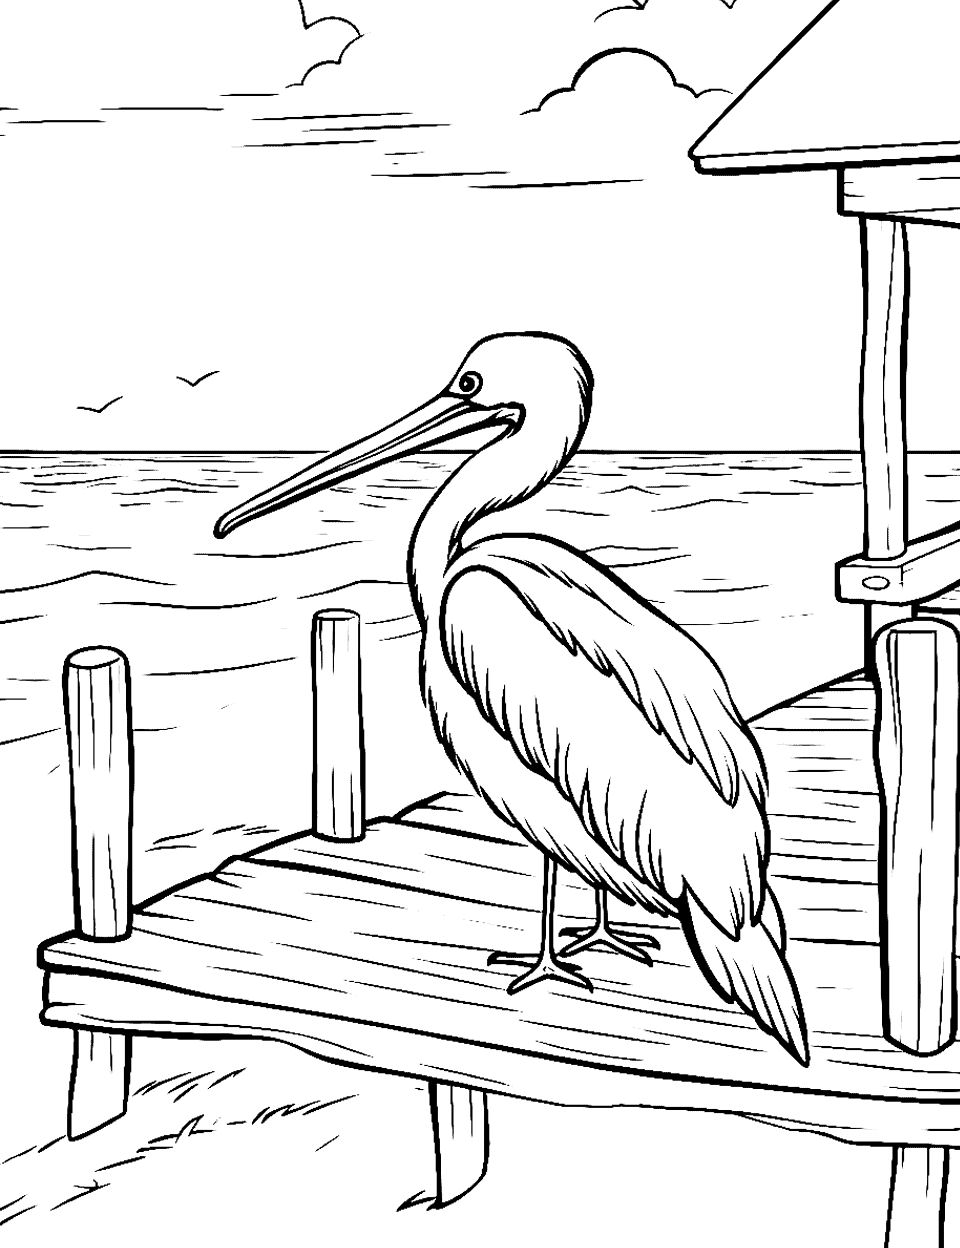 Pelican Resting on Pier Coloring Page - A single pelican calmly resting on a simple, uncluttered wooden pier.